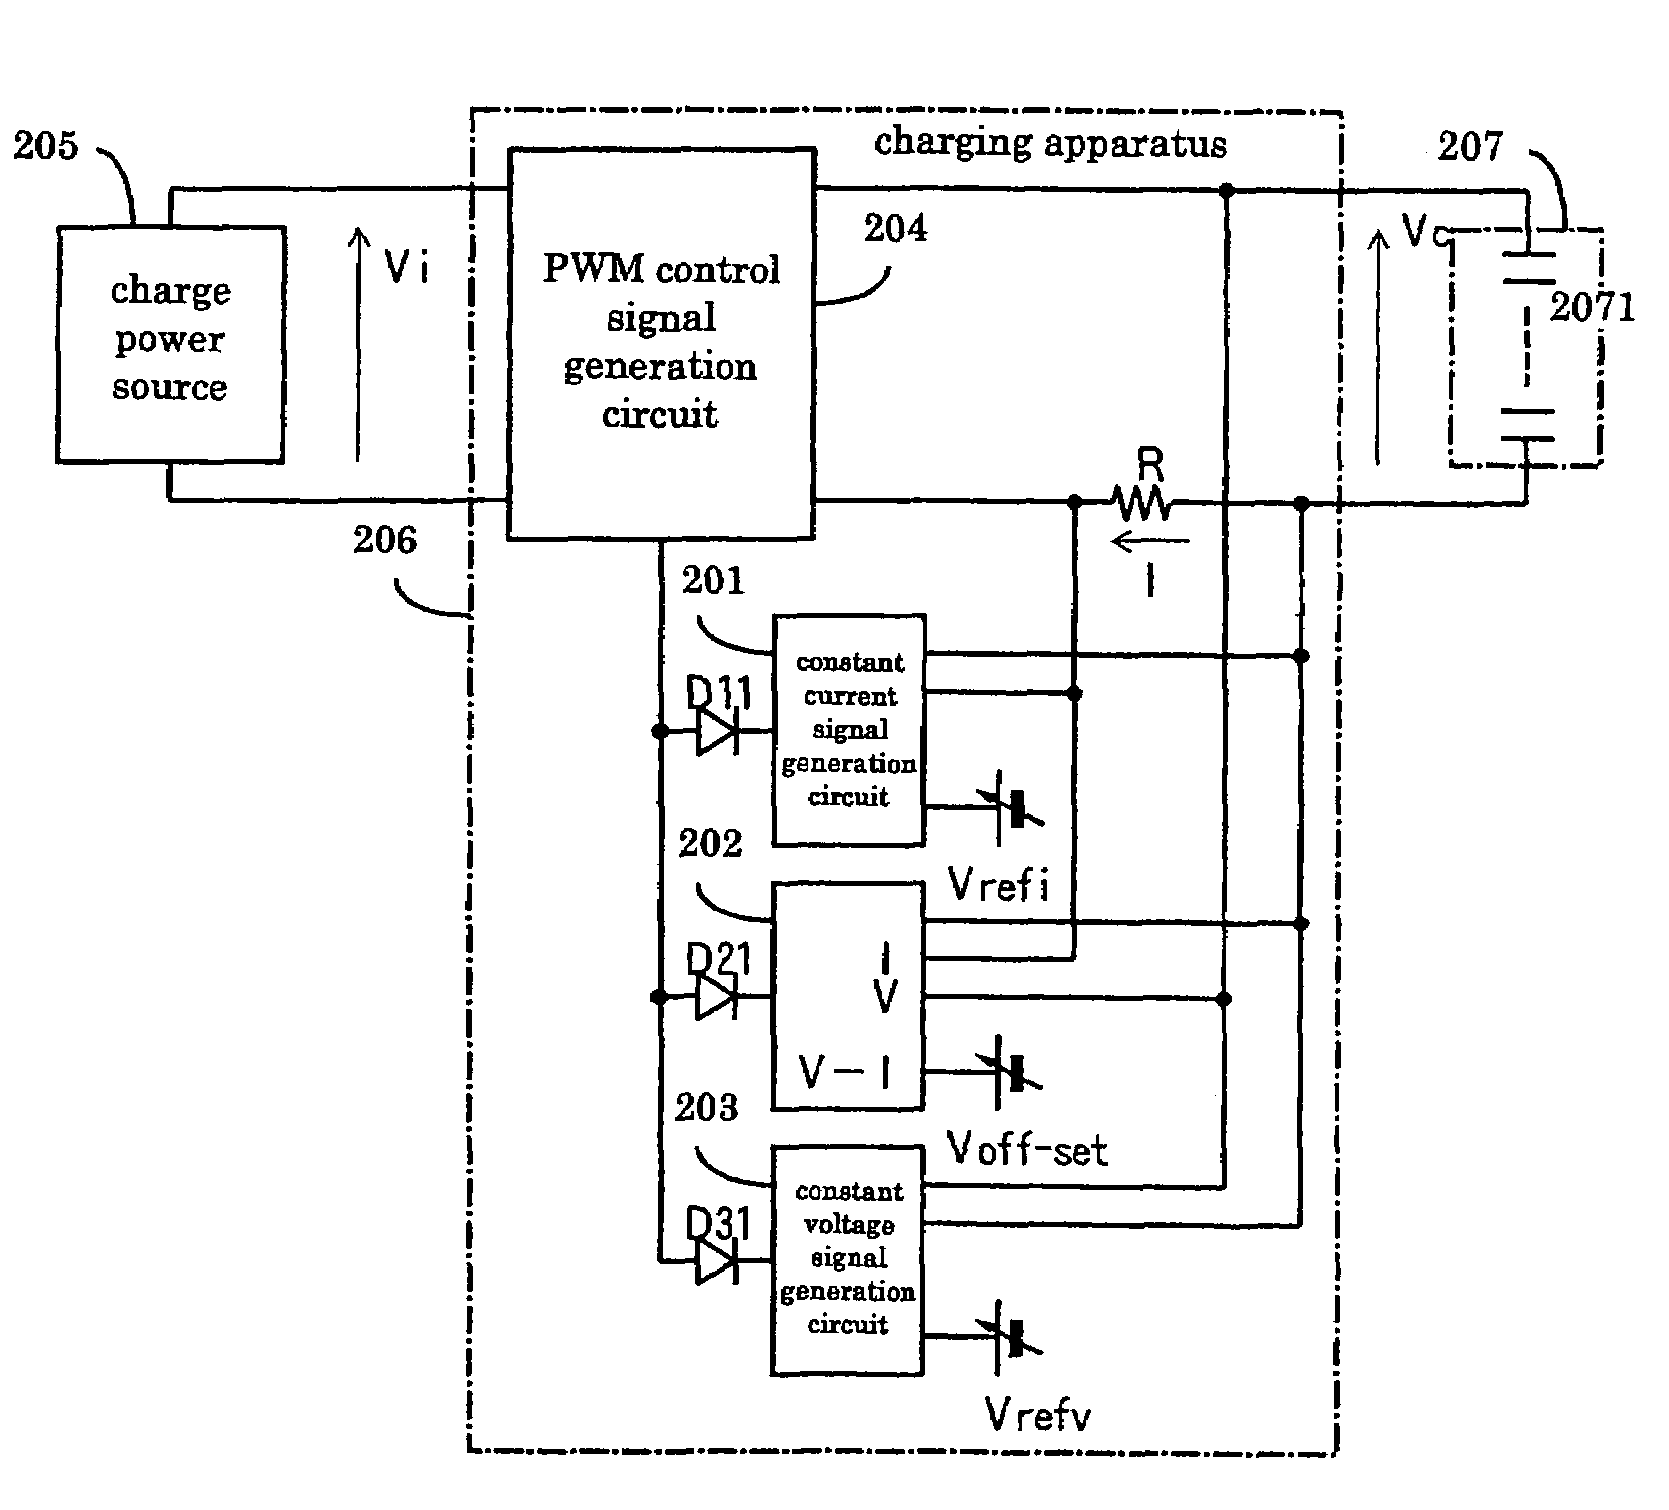 Charging or discharging apparatus for electrically charging or discharging a capacitor storage type power source adapted to store electric energy in electric double layer capacitors